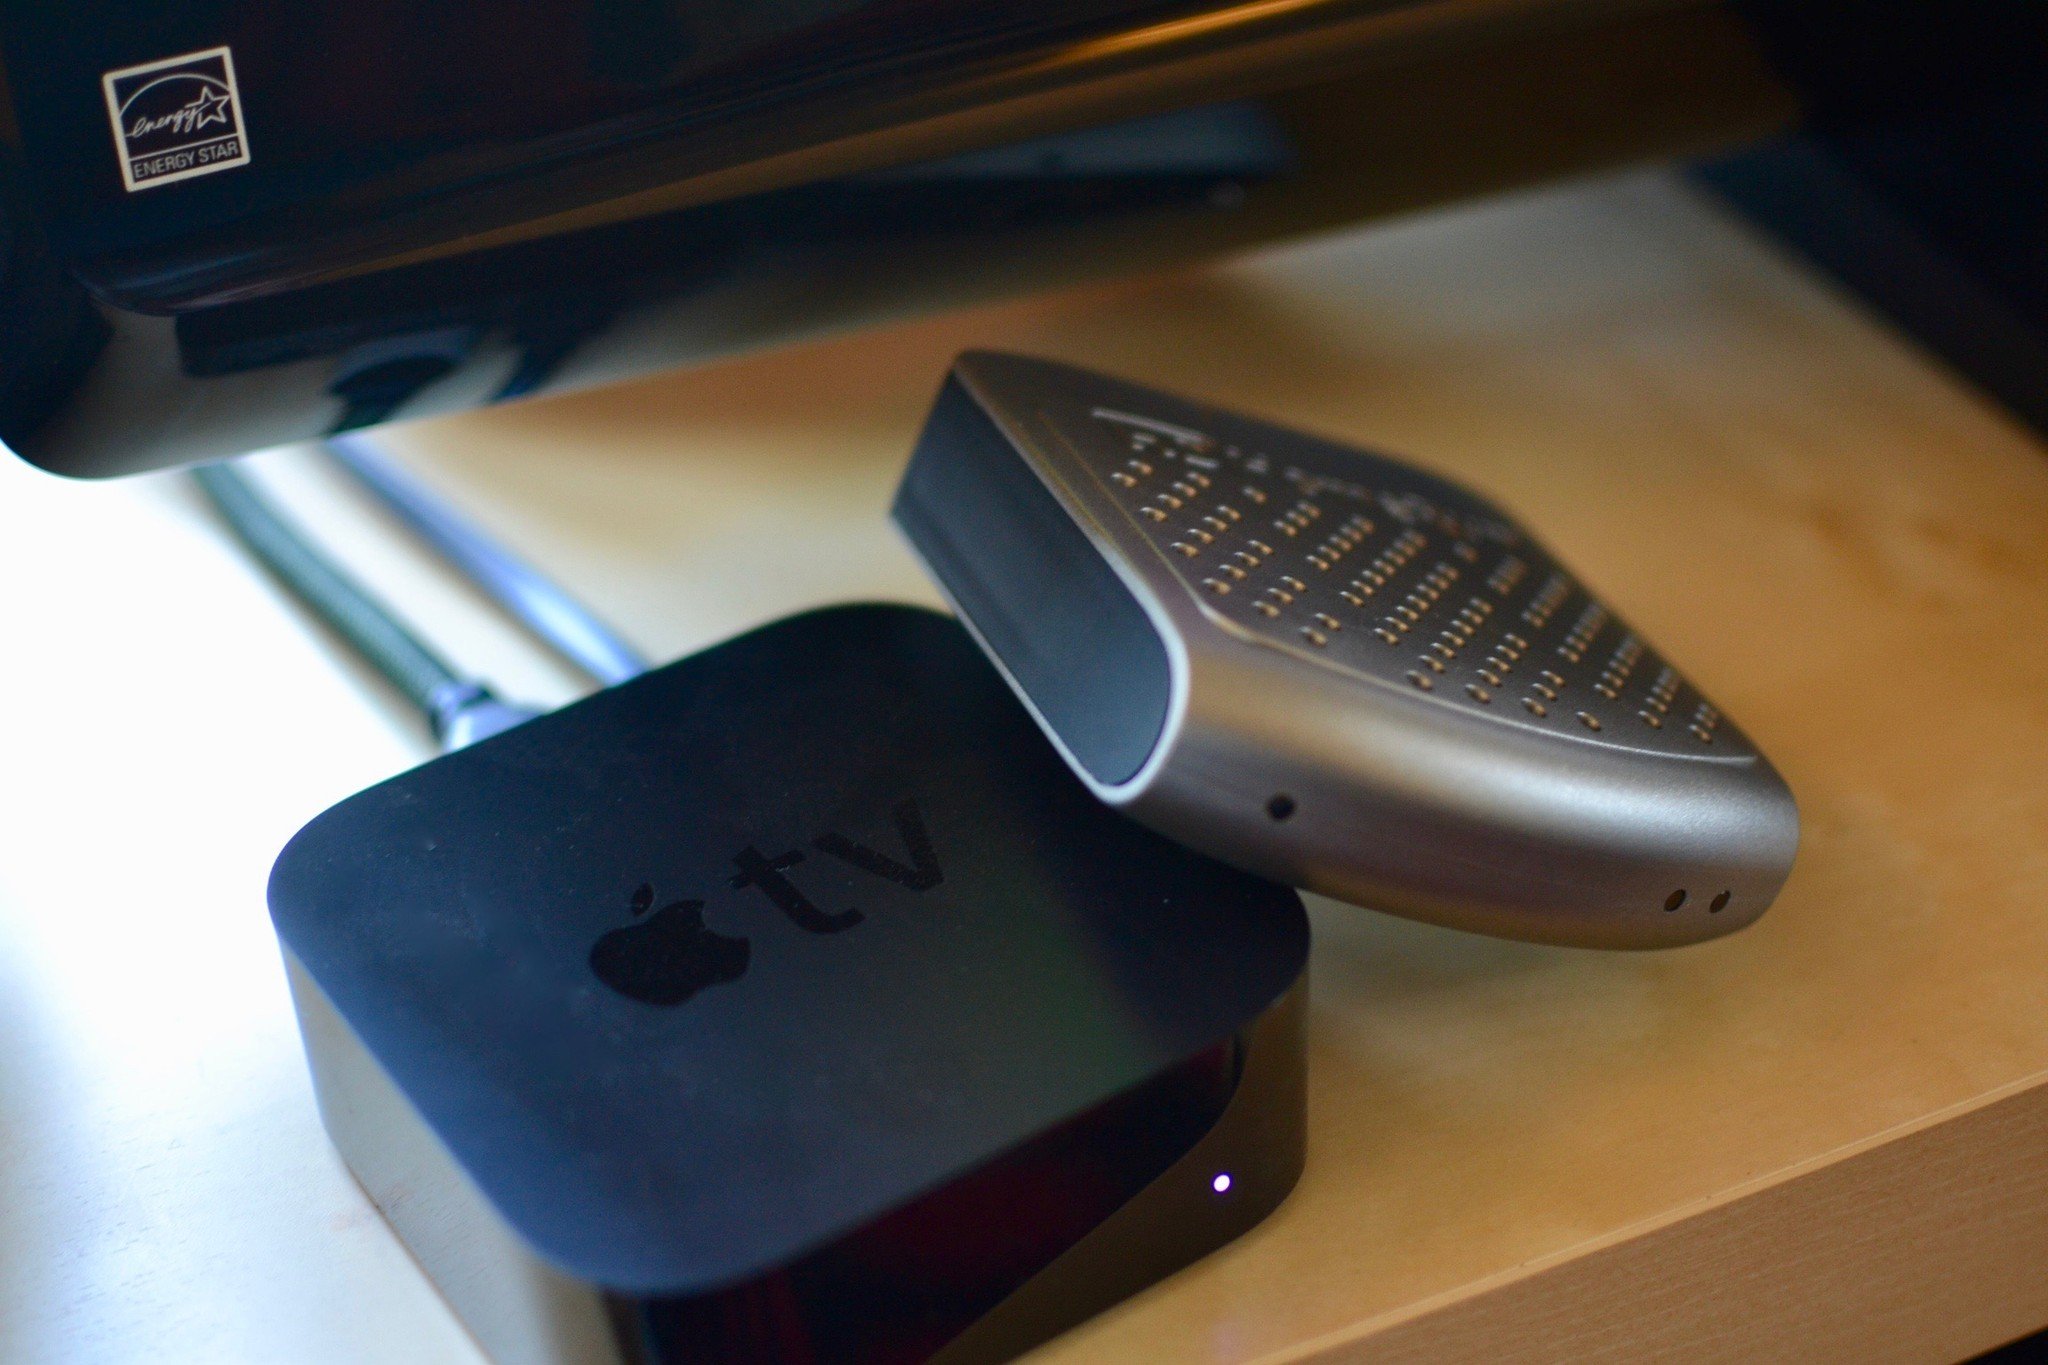 How to watch live broadcast TV on your Apple TV without cable | iMore